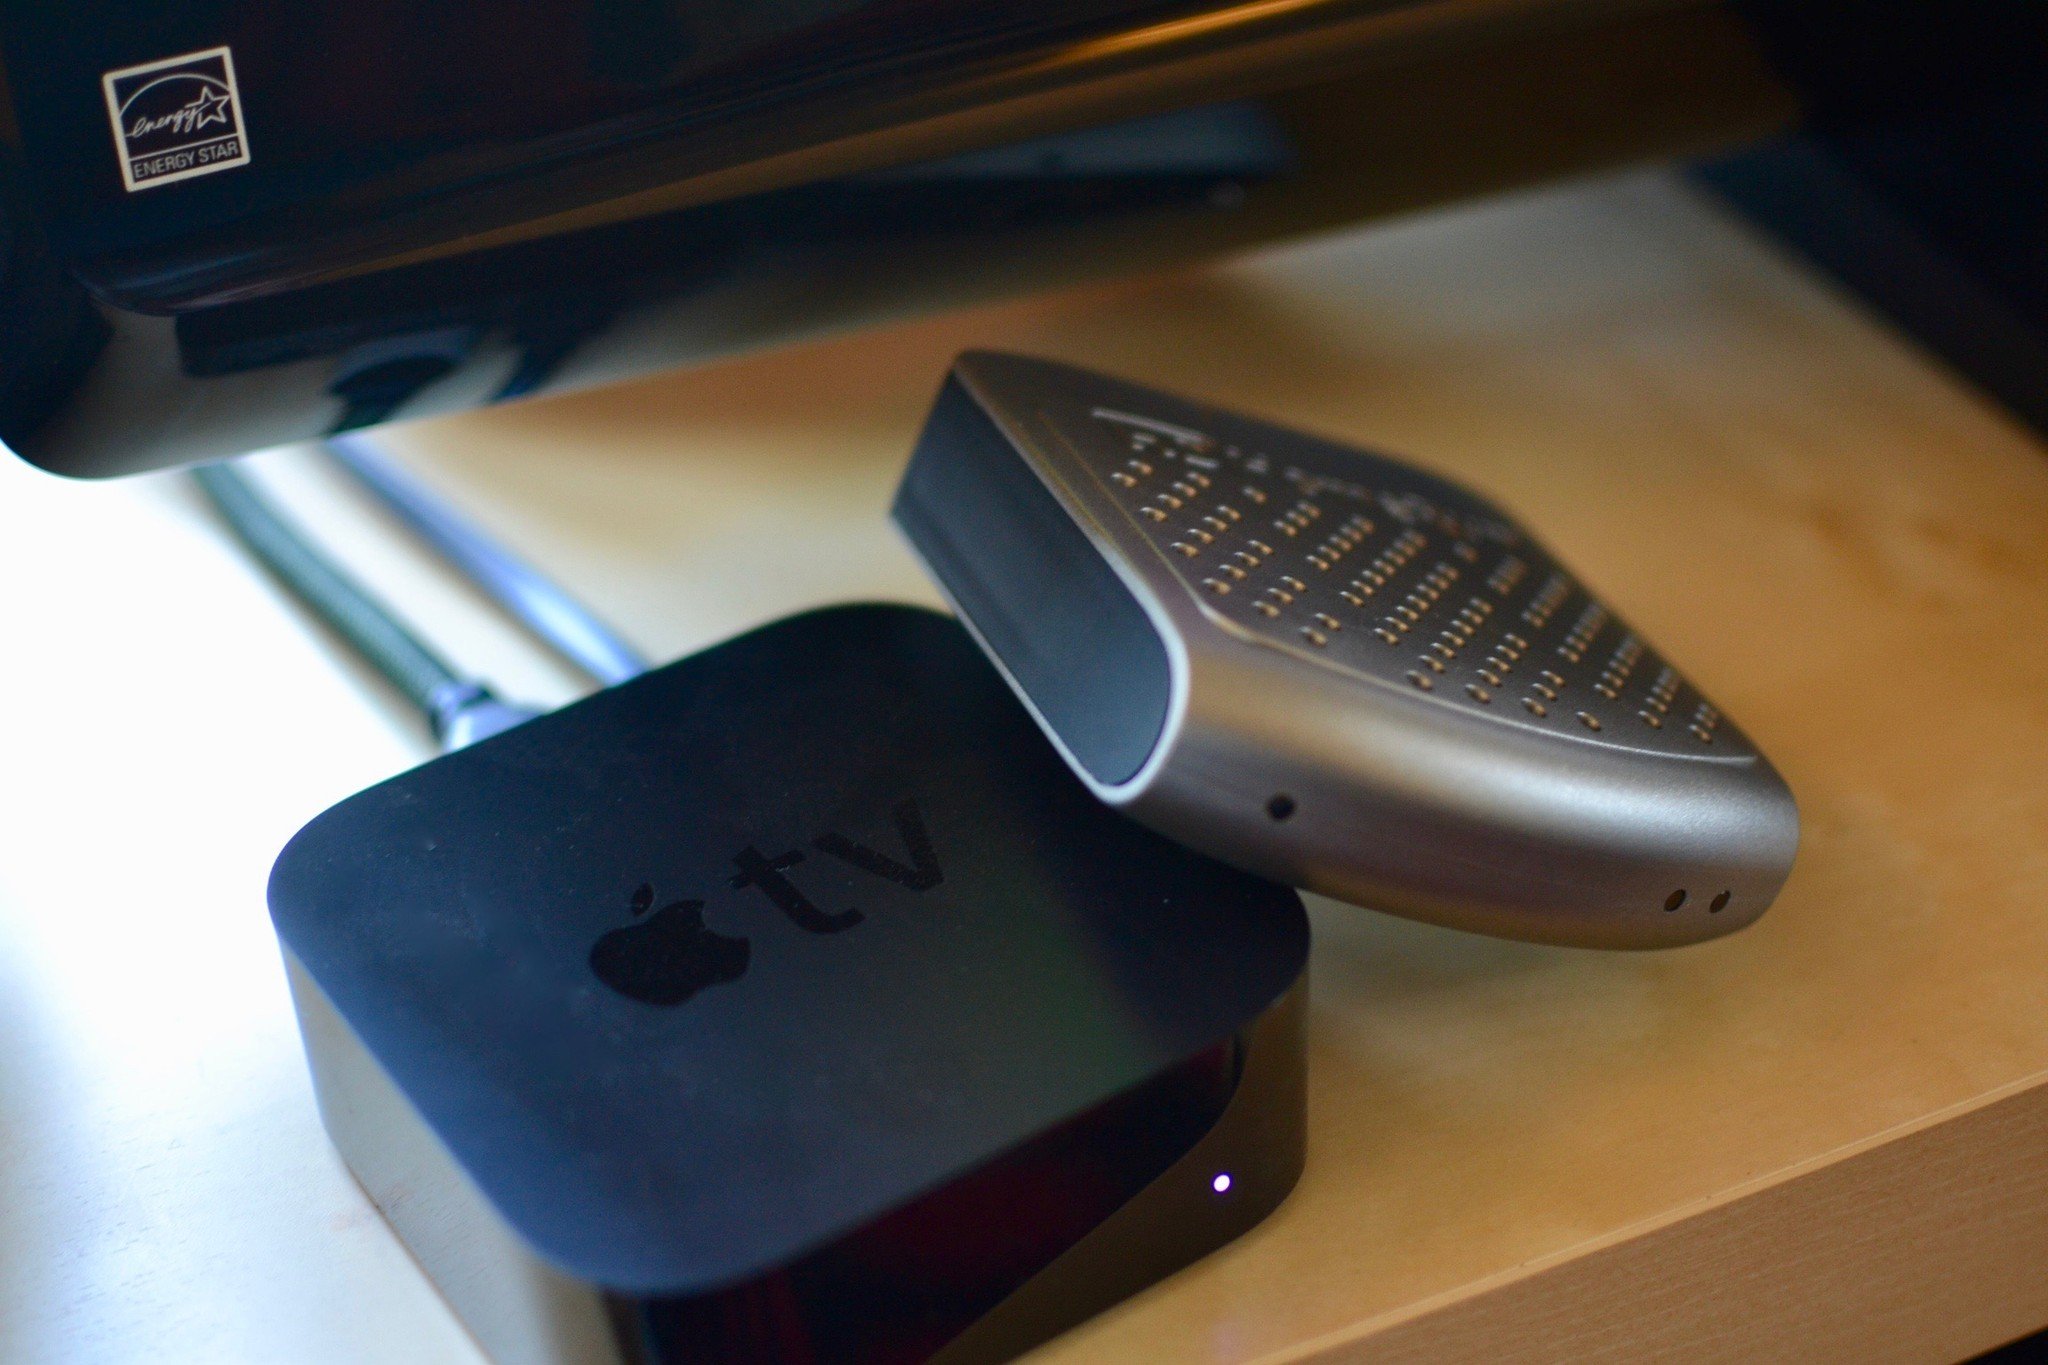 How to watch live broadcast TV on your Apple TV without cable | iMore